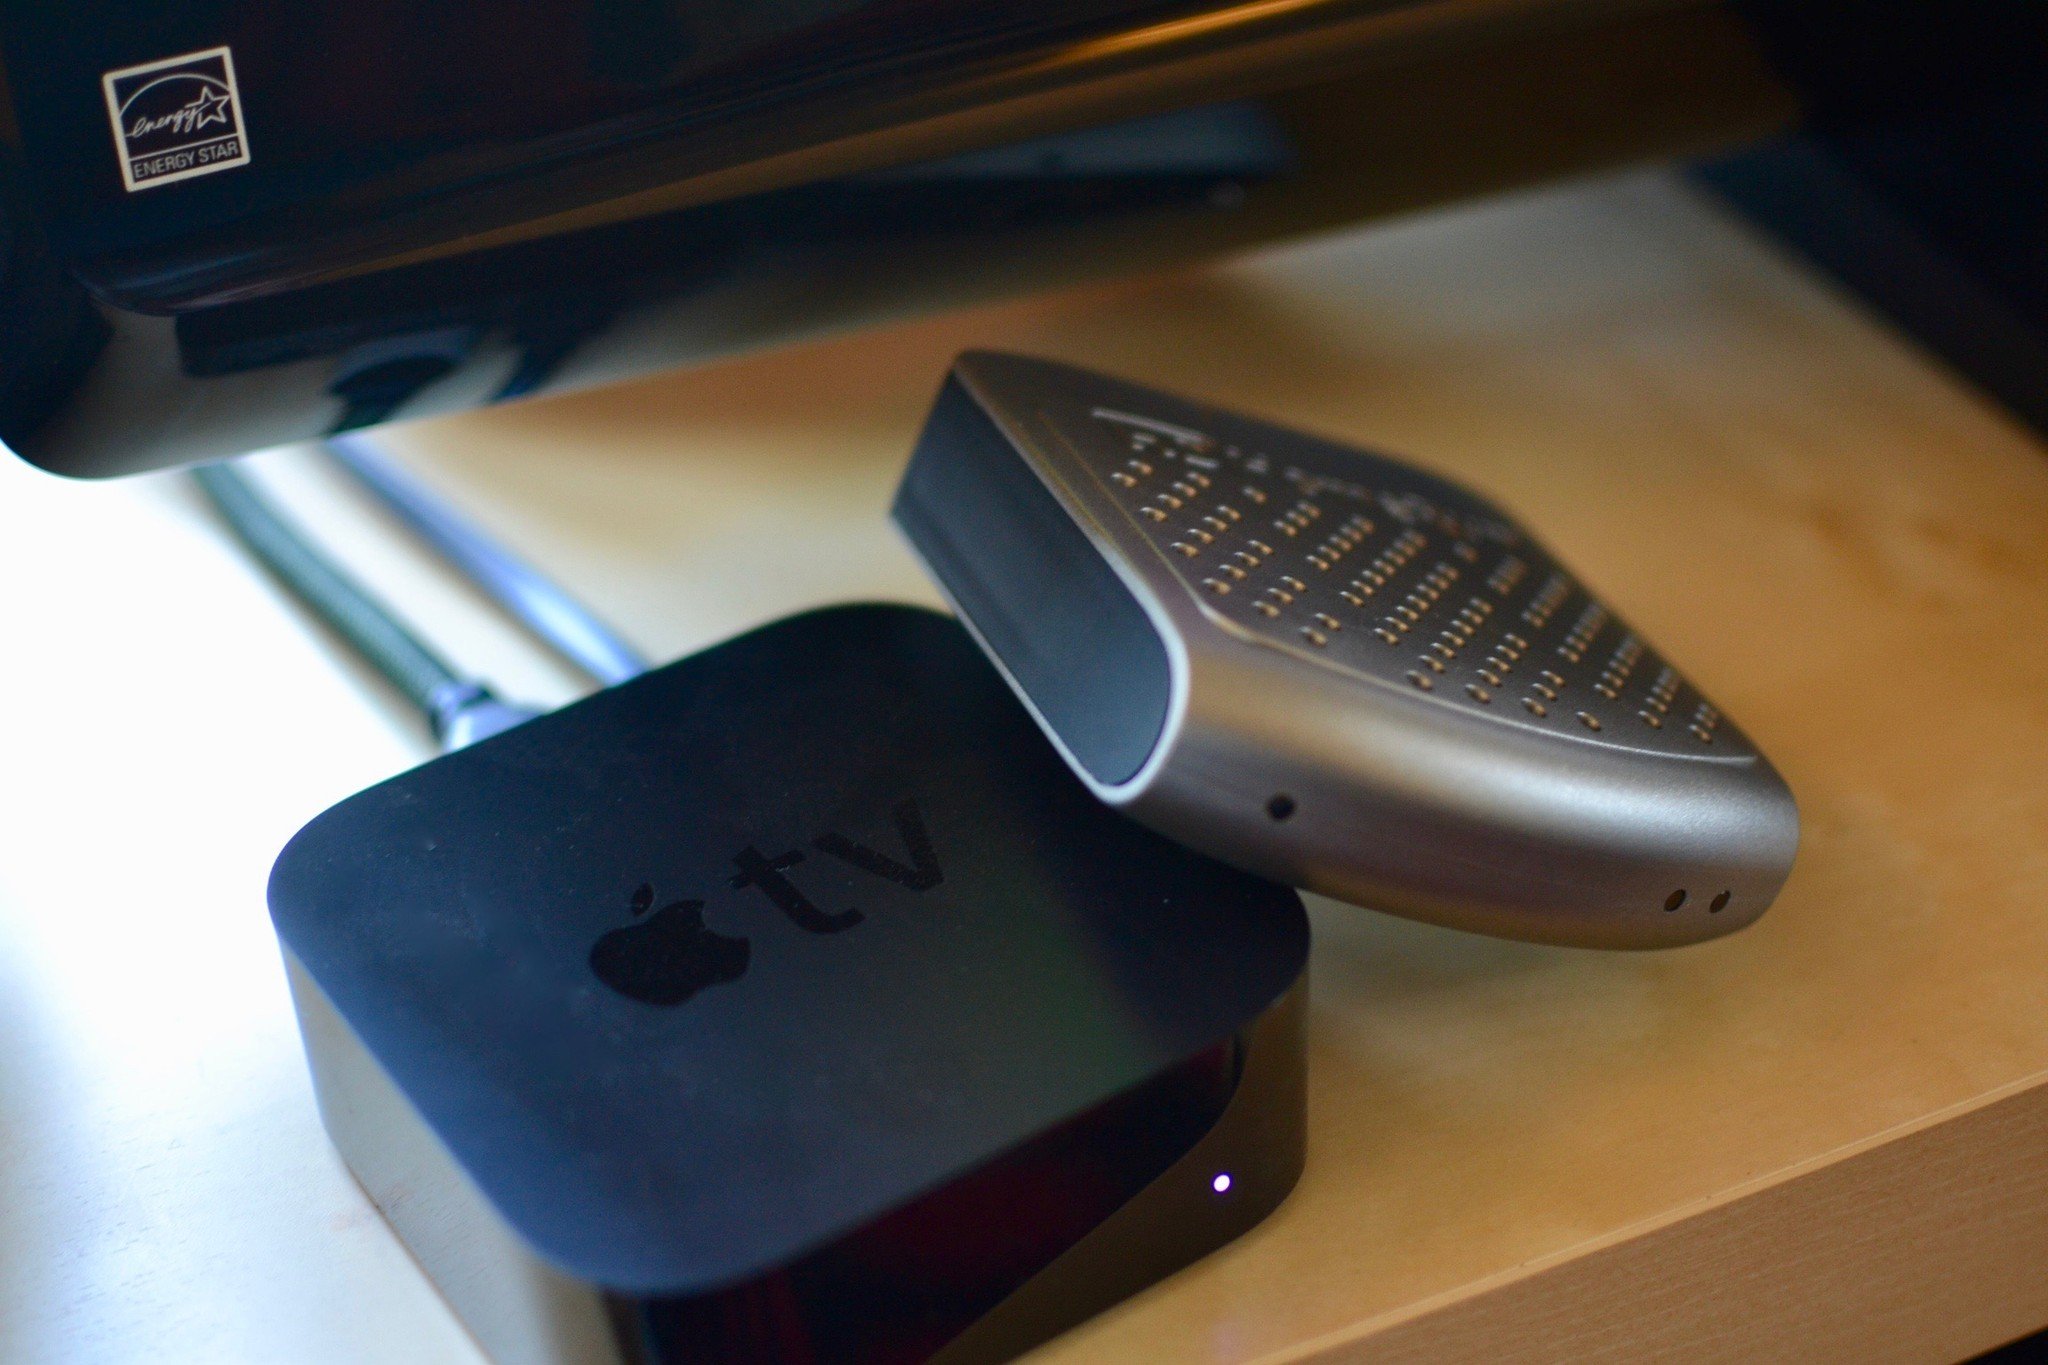 How to watch live broadcast TV on your Apple TV without cable | iMore